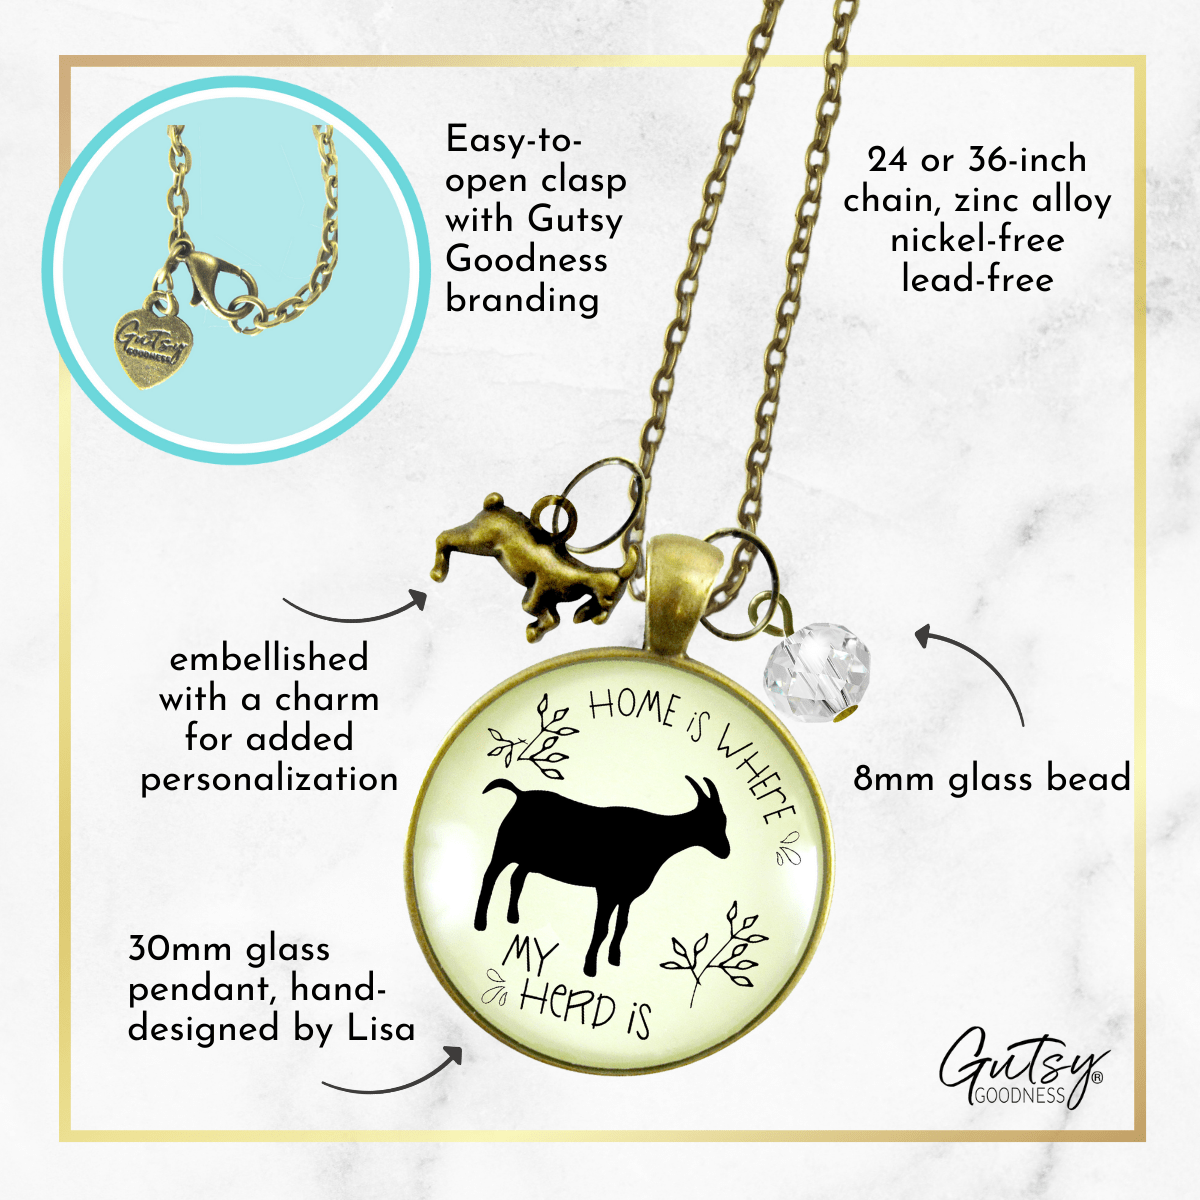 Gutsy Goodness Goat Jewelry Home is Where Your Herd is Necklace Farmhouse Style - Gutsy Goodness Handmade Jewelry;Goat Jewelry Home Is Where Your Herd Is Necklace Farmhouse Style - Gutsy Goodness Handmade Jewelry Gifts